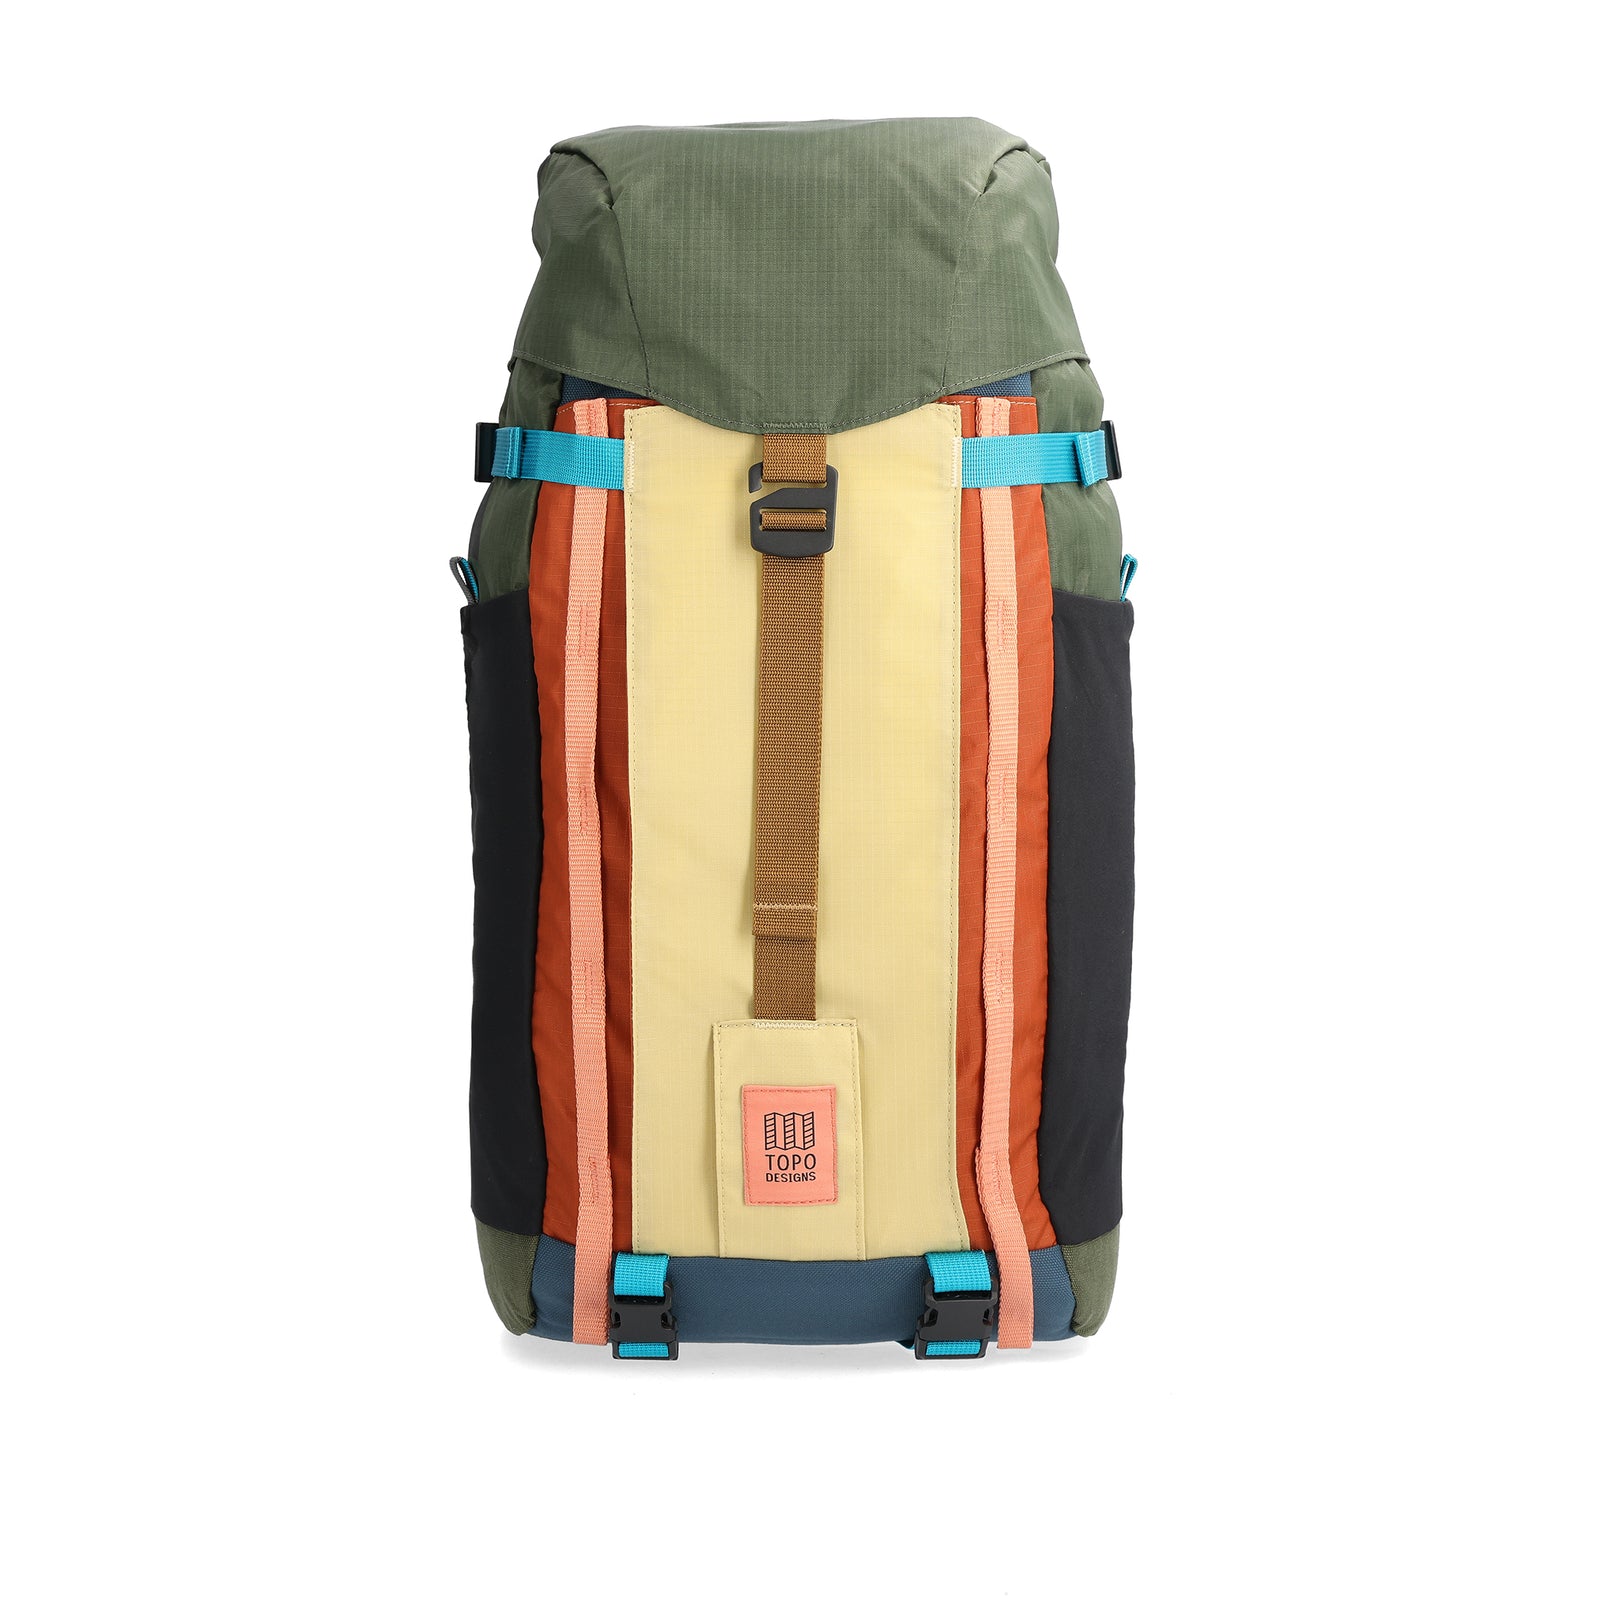 Front View of Topo Designs Mountain Pack 16L 2.0 in "Olive / Hemp"